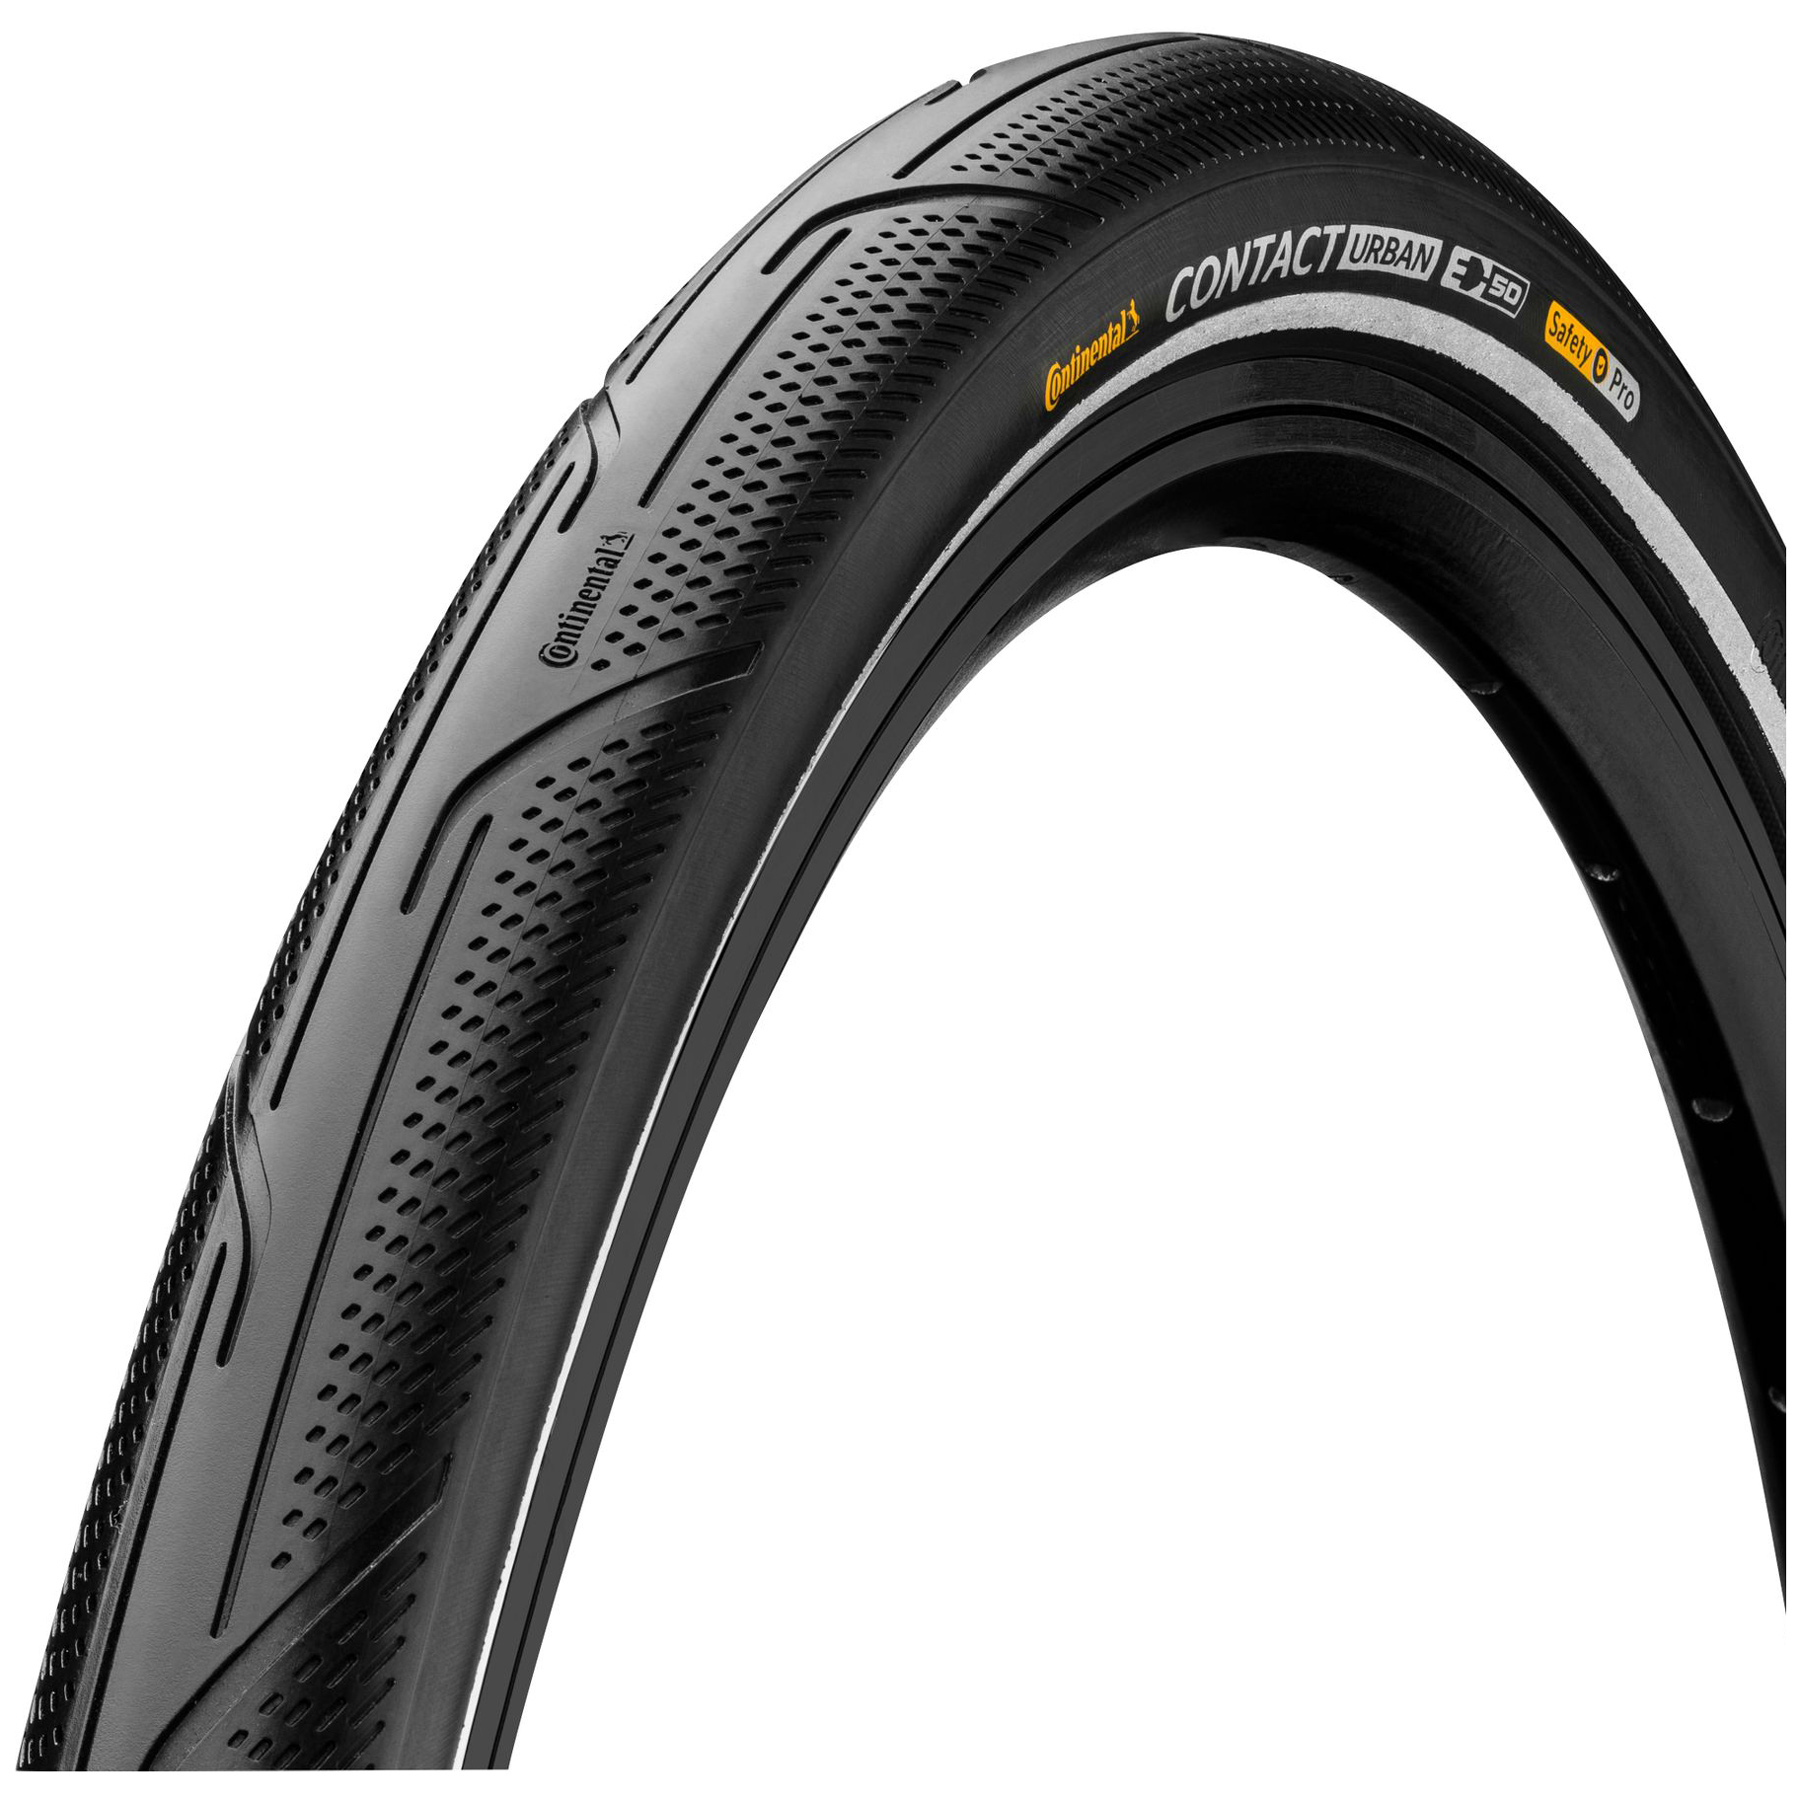 Picture of Continental Contact Urban Wire Bead Tire - PureGrip | ECE-R75 - 37-622 | black reflective